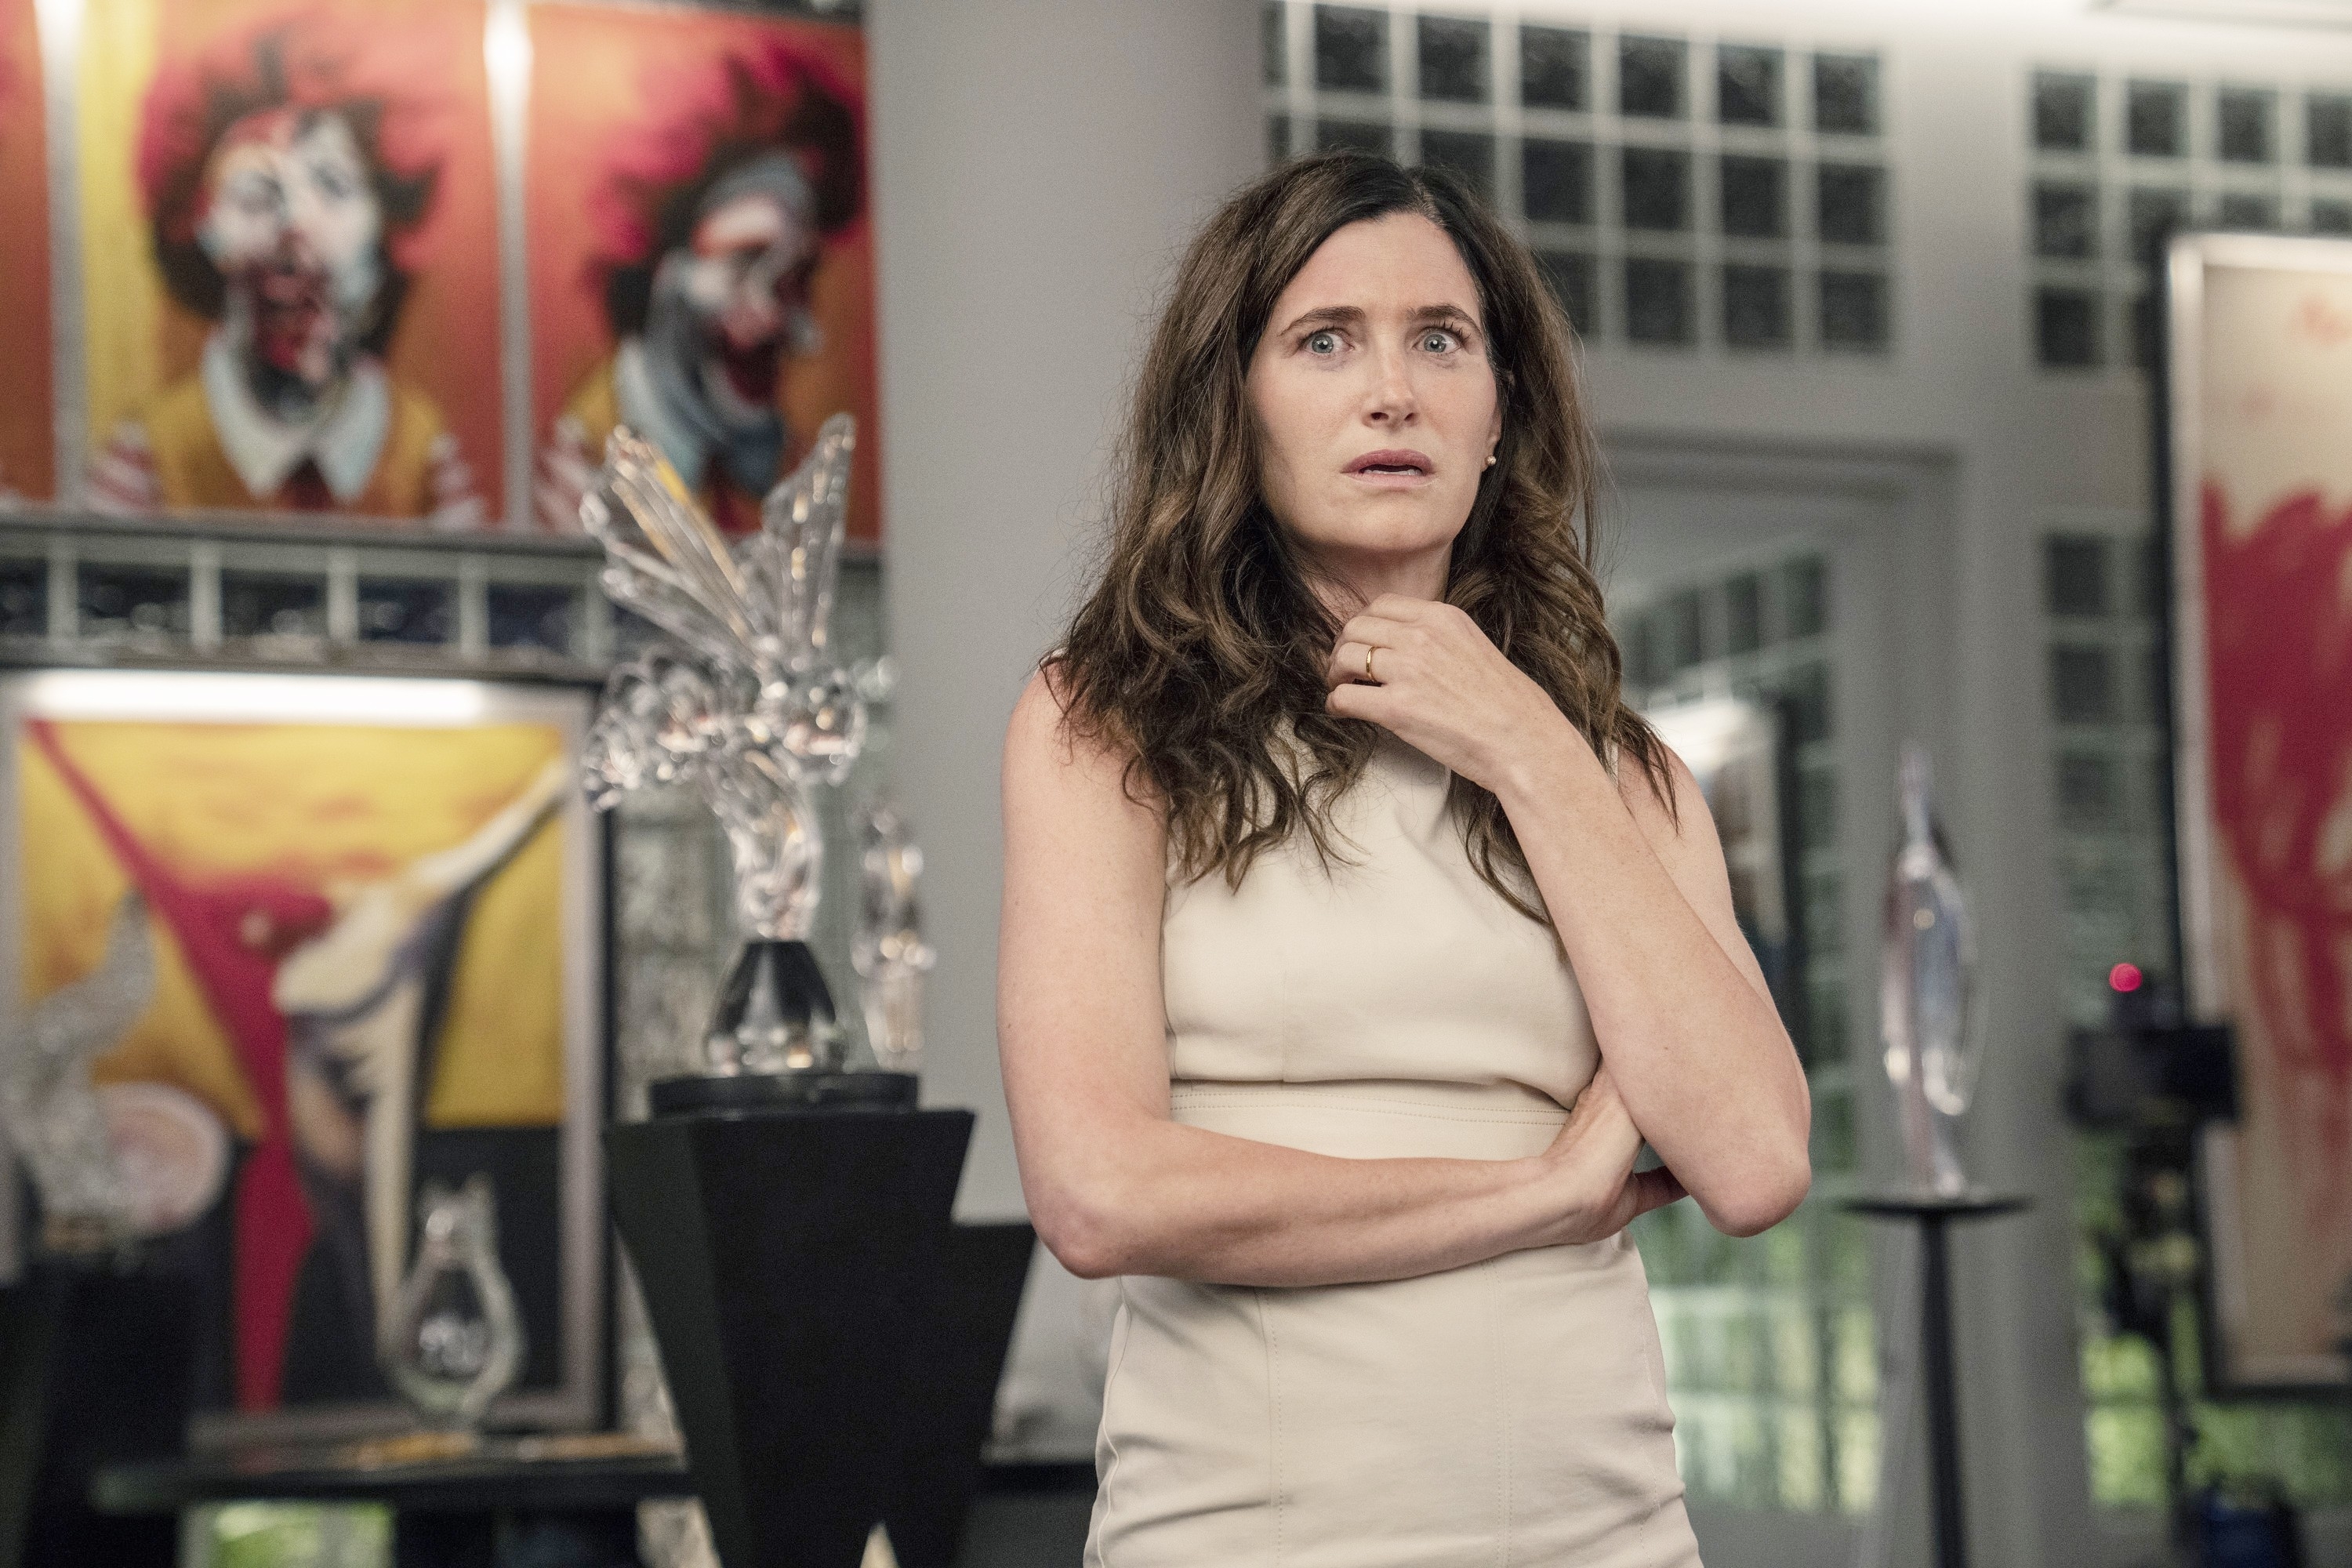 Kathryn Hahn stands in an art gallery wearing a sleeveless, high-neck dress, looking contemplative. Several abstract paintings and sculptures are in the background